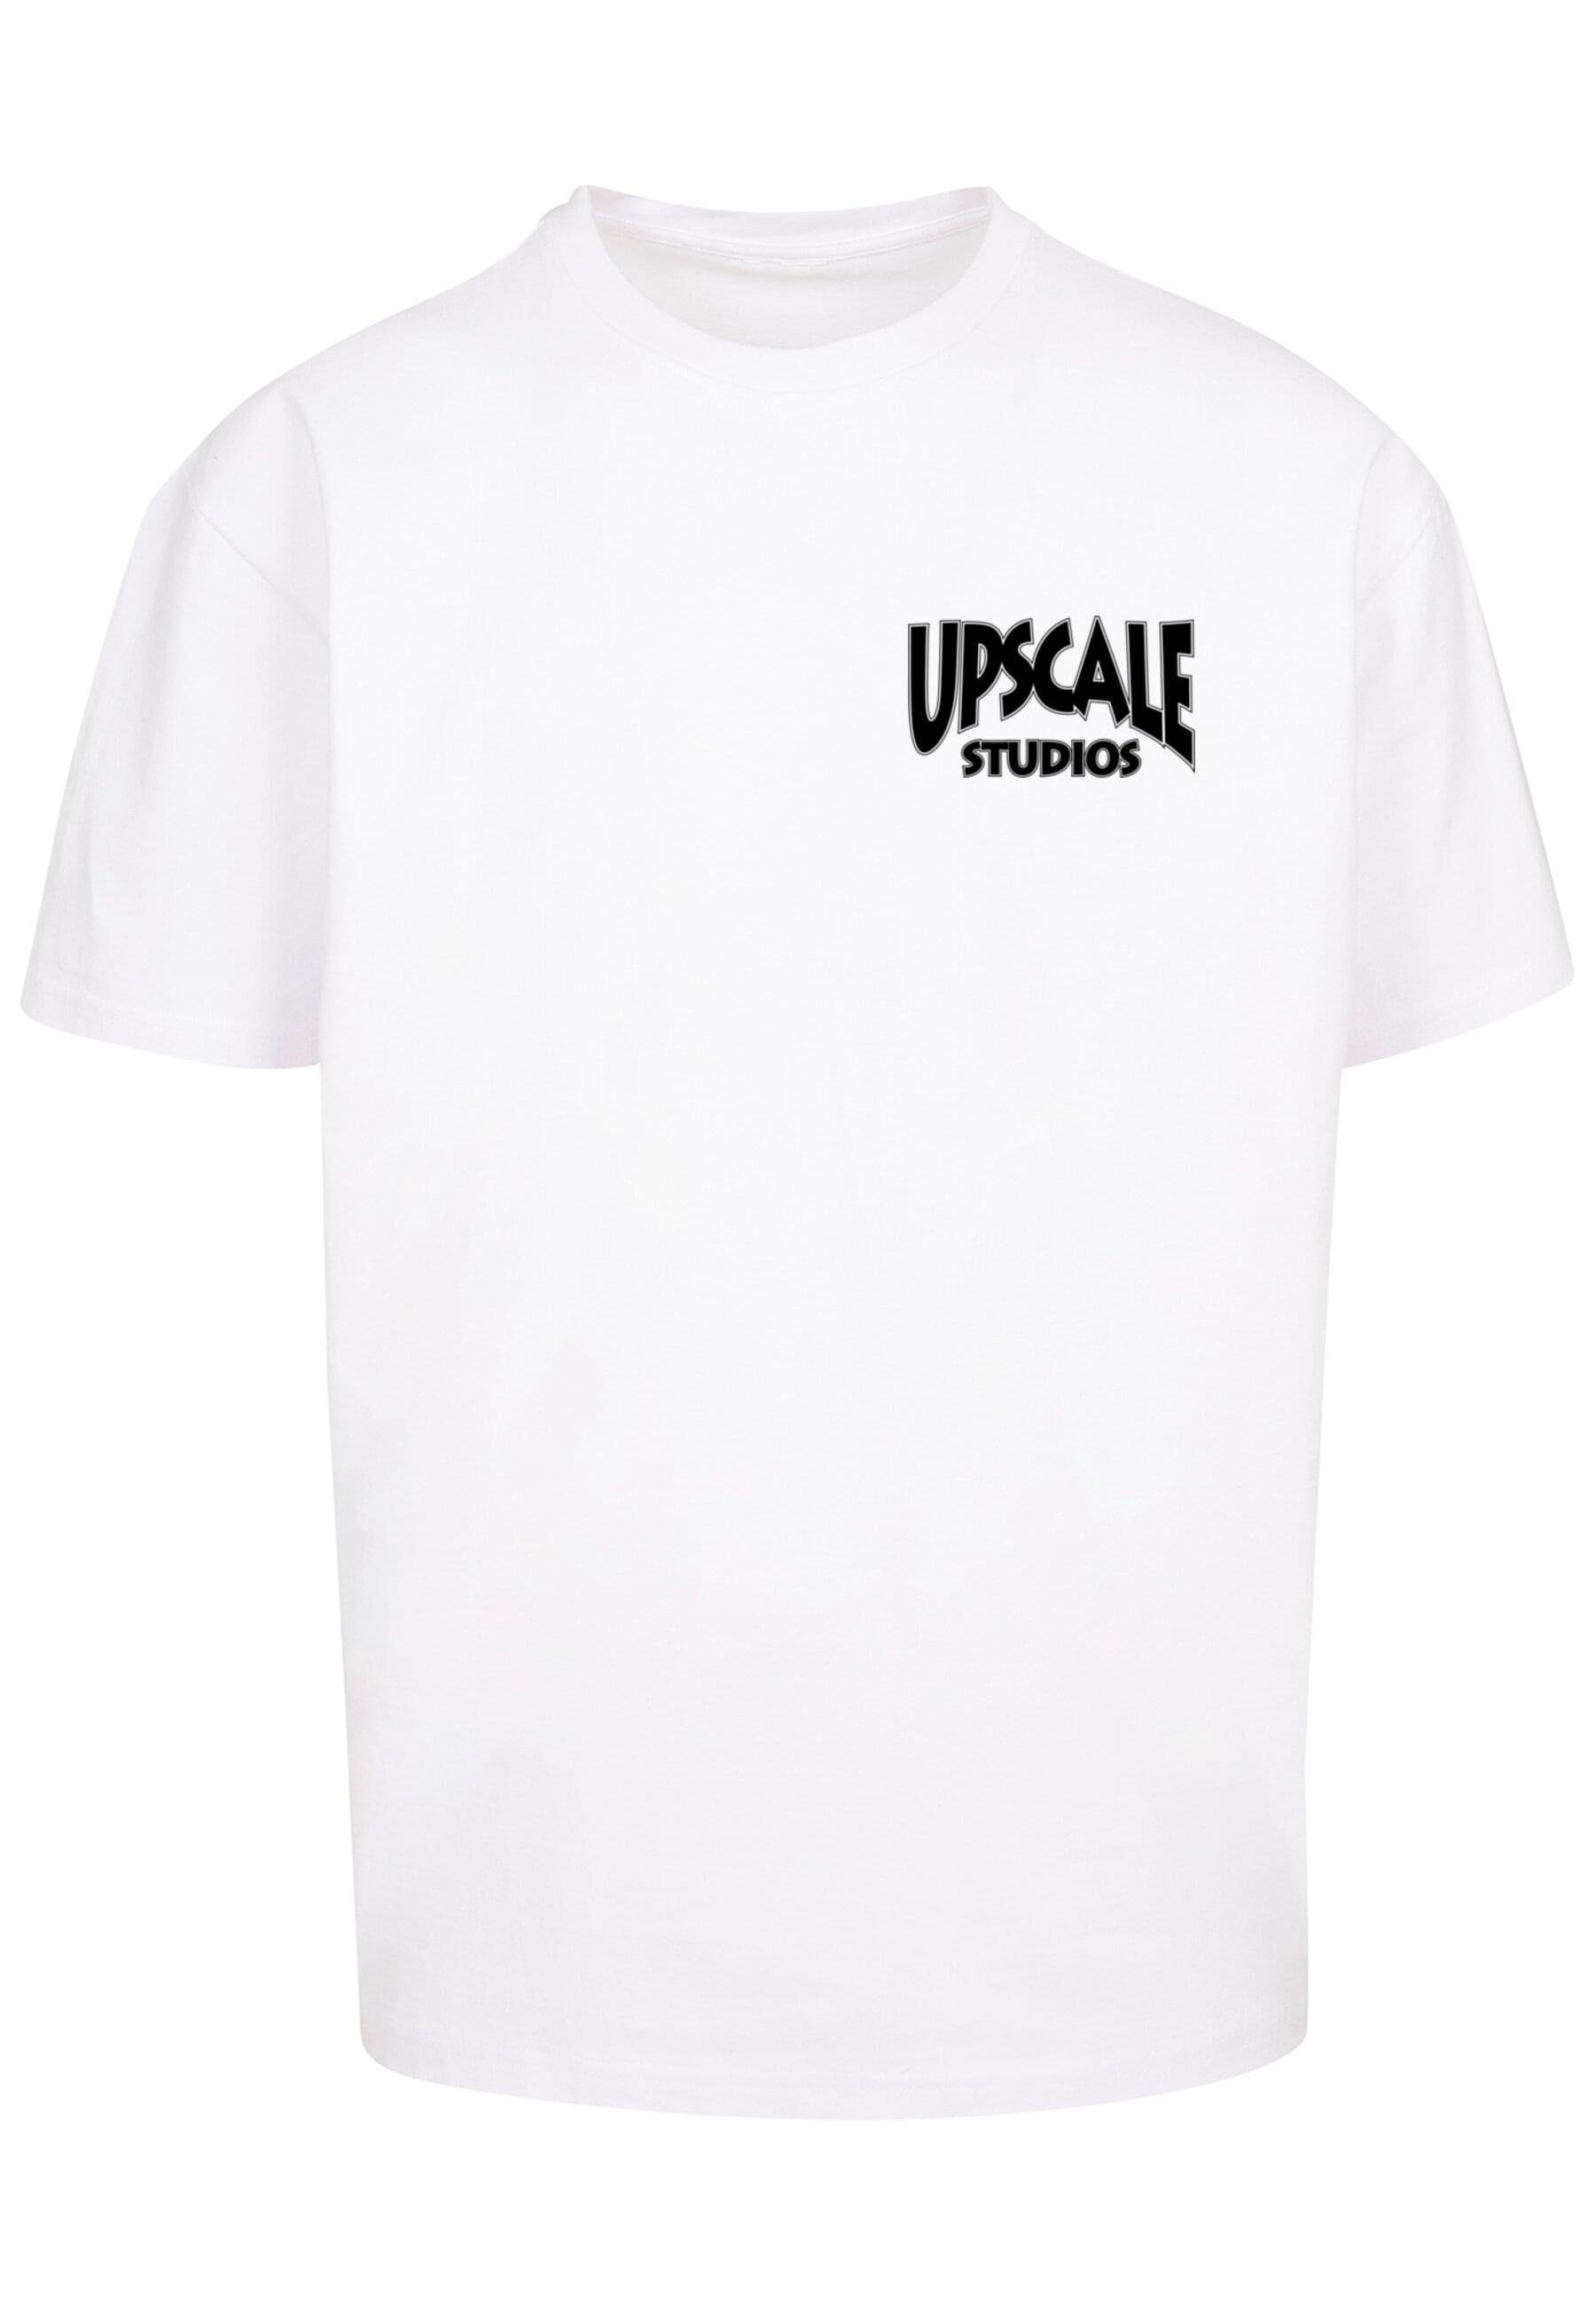 Upscale by Mister Tee T-Shirt Upscale by Mister Tee Unisex Upscale Studios Oversize Tee (1-tlg)